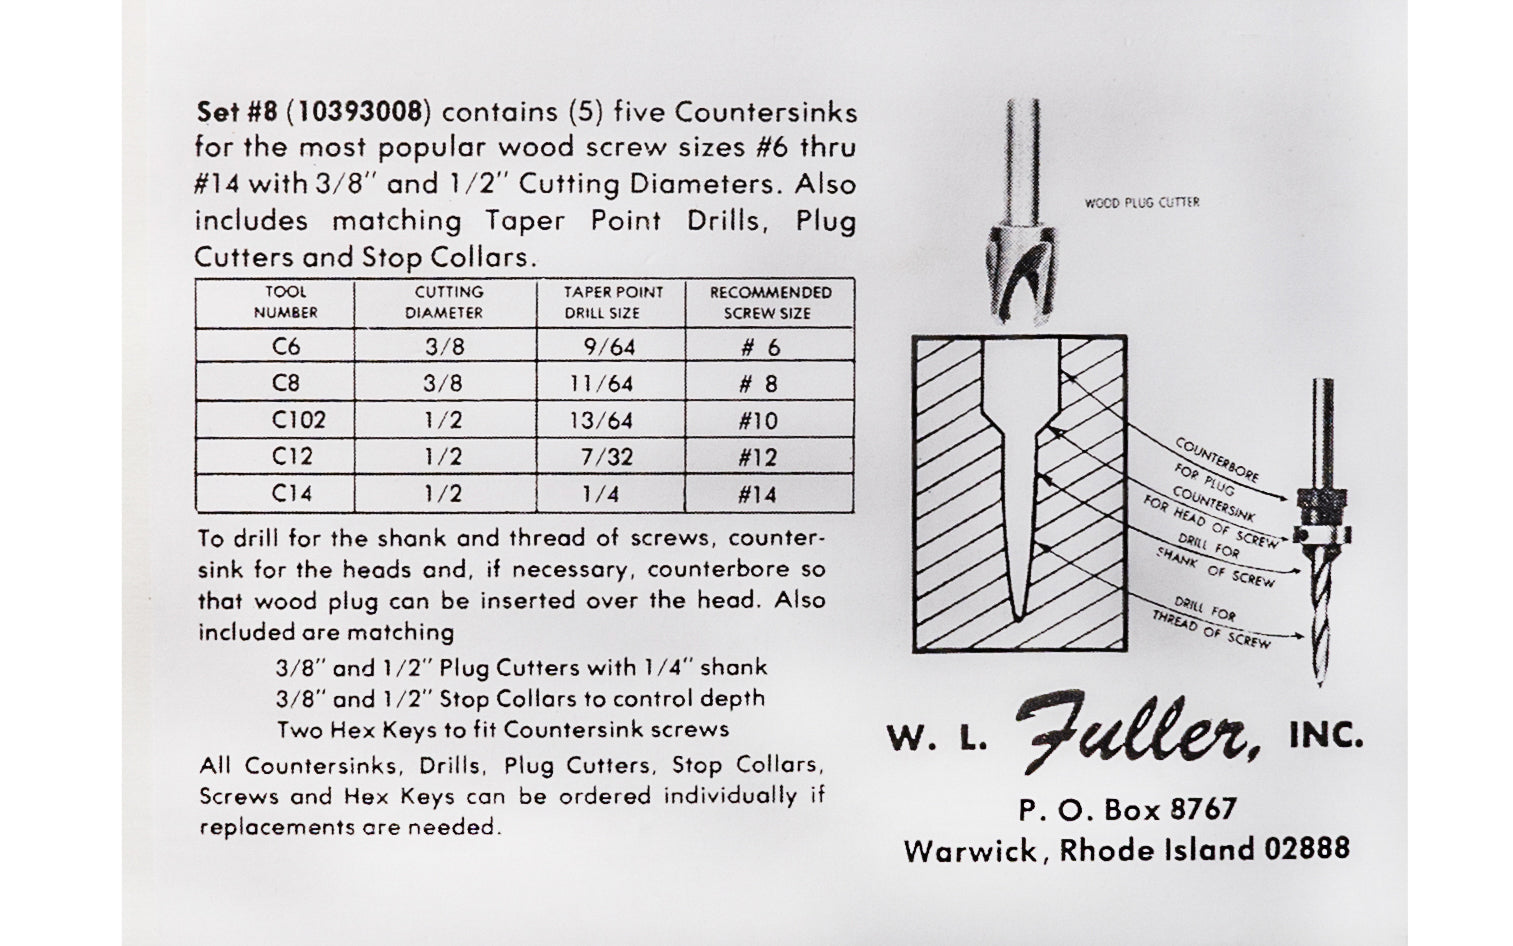 W.L. Fuller No. 8 Set - Model 10393008 - Combination countersink & quick change taper drill bit set with 1/2" & 3/8" plug cutters & stop collars. Set is designed for #6, #8, #10, #12, & #14 wood screws. Made of carbon steel & heat-treated. Four flute countersinks for clean & accurate boring. Hex Drill Bits. Made in USA